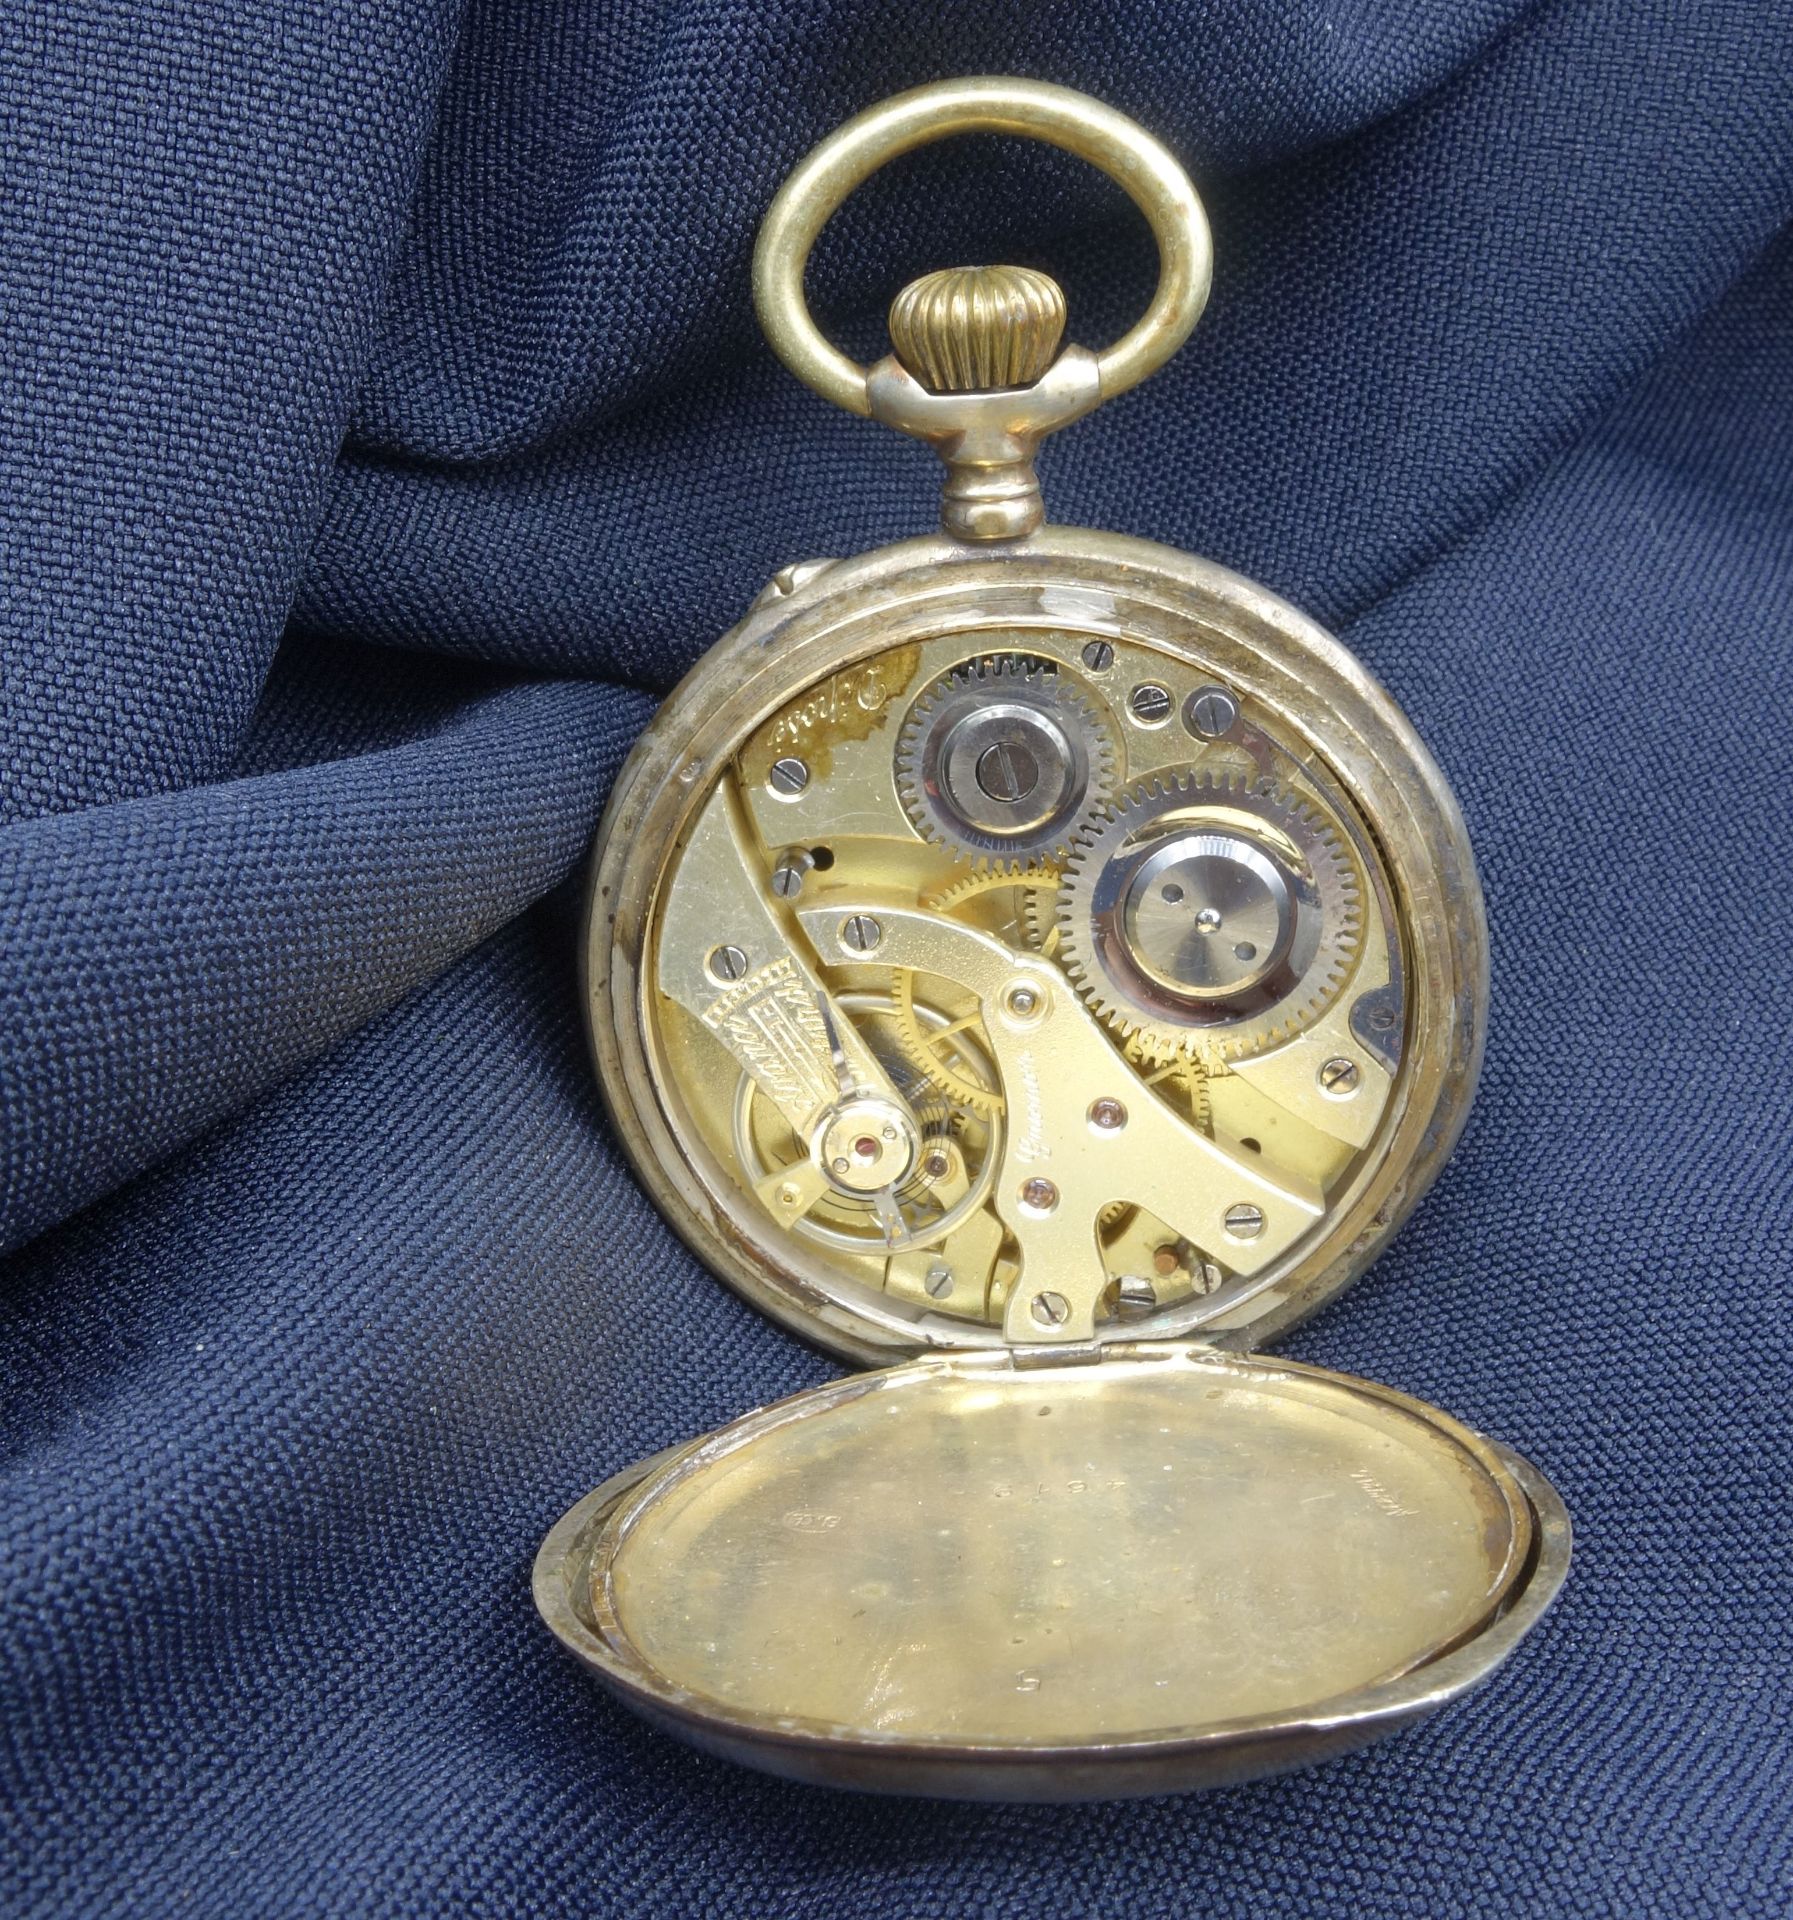 SILVER POCKET WATCH WITH POCKET WATCH CHAIN - Image 4 of 6